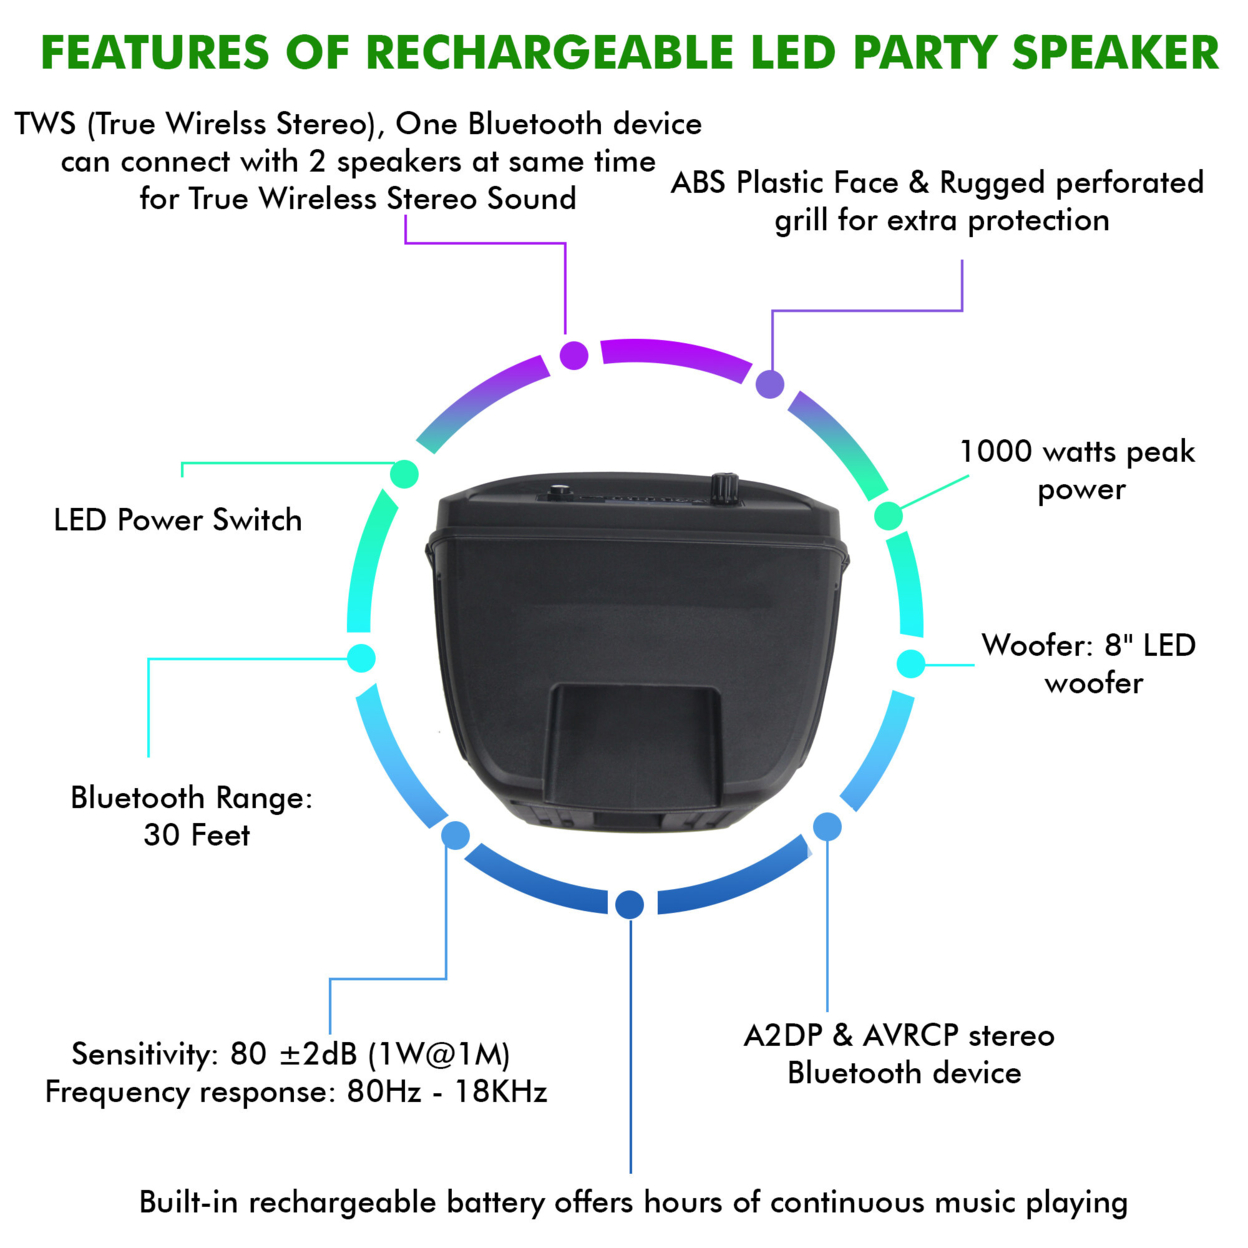 2 Set Technical Pro 8 Inch Portable 1000 watts Bluetooth Speaker w/ Woofer and Tweeter Party PA LED Speaker w/ - image 5 of 7